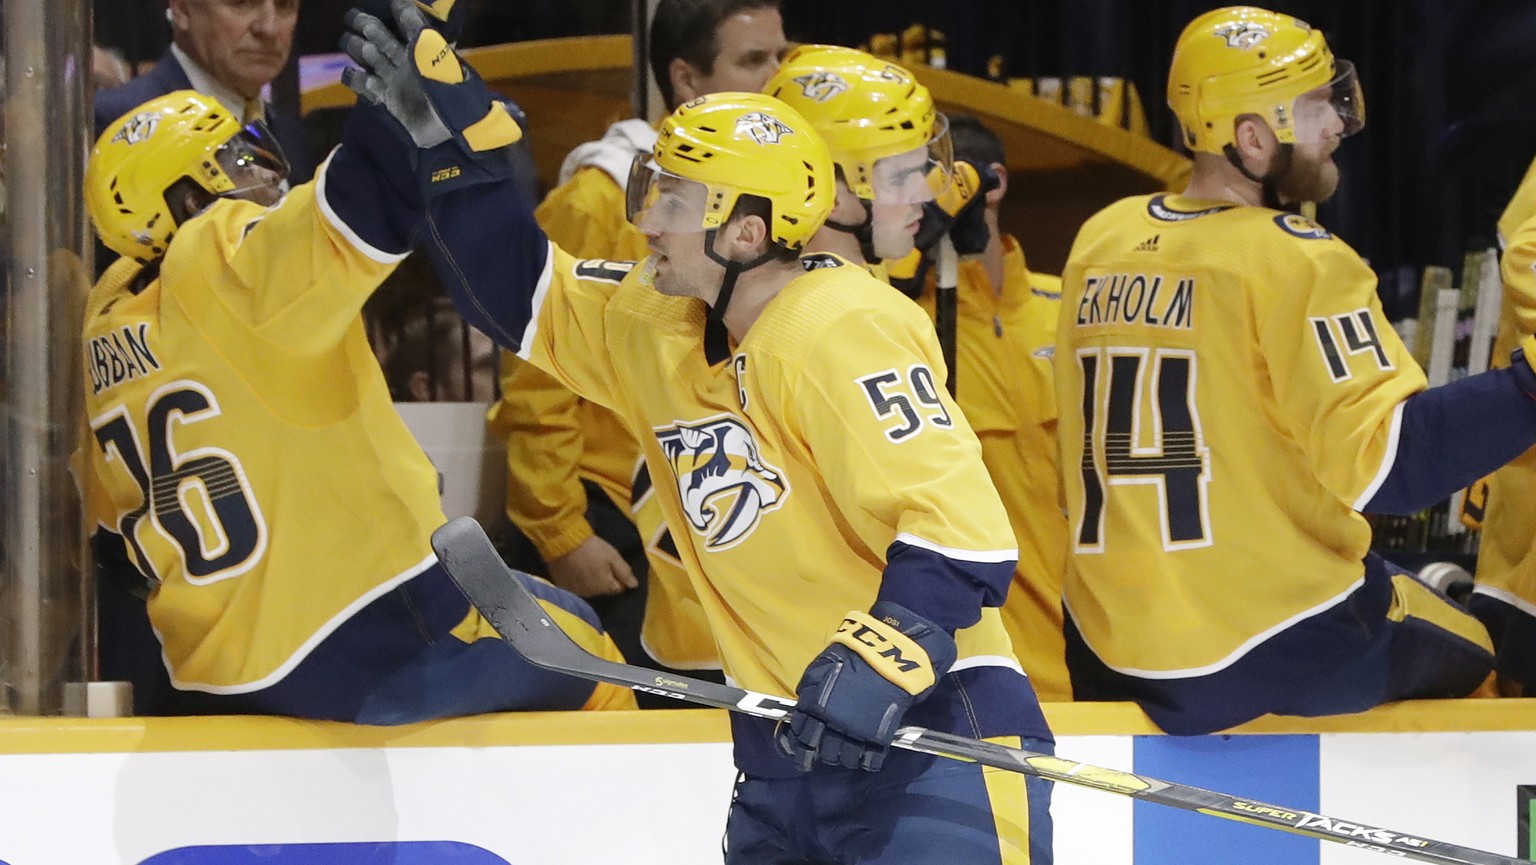 Nashville Predators defenseman Roman Josi (59), of Switzerland, celebrates with P.K. Subban (76) after Josi scored a goal against the Dallas Stars during the first period in Game 1 of an NHL hockey fi ...